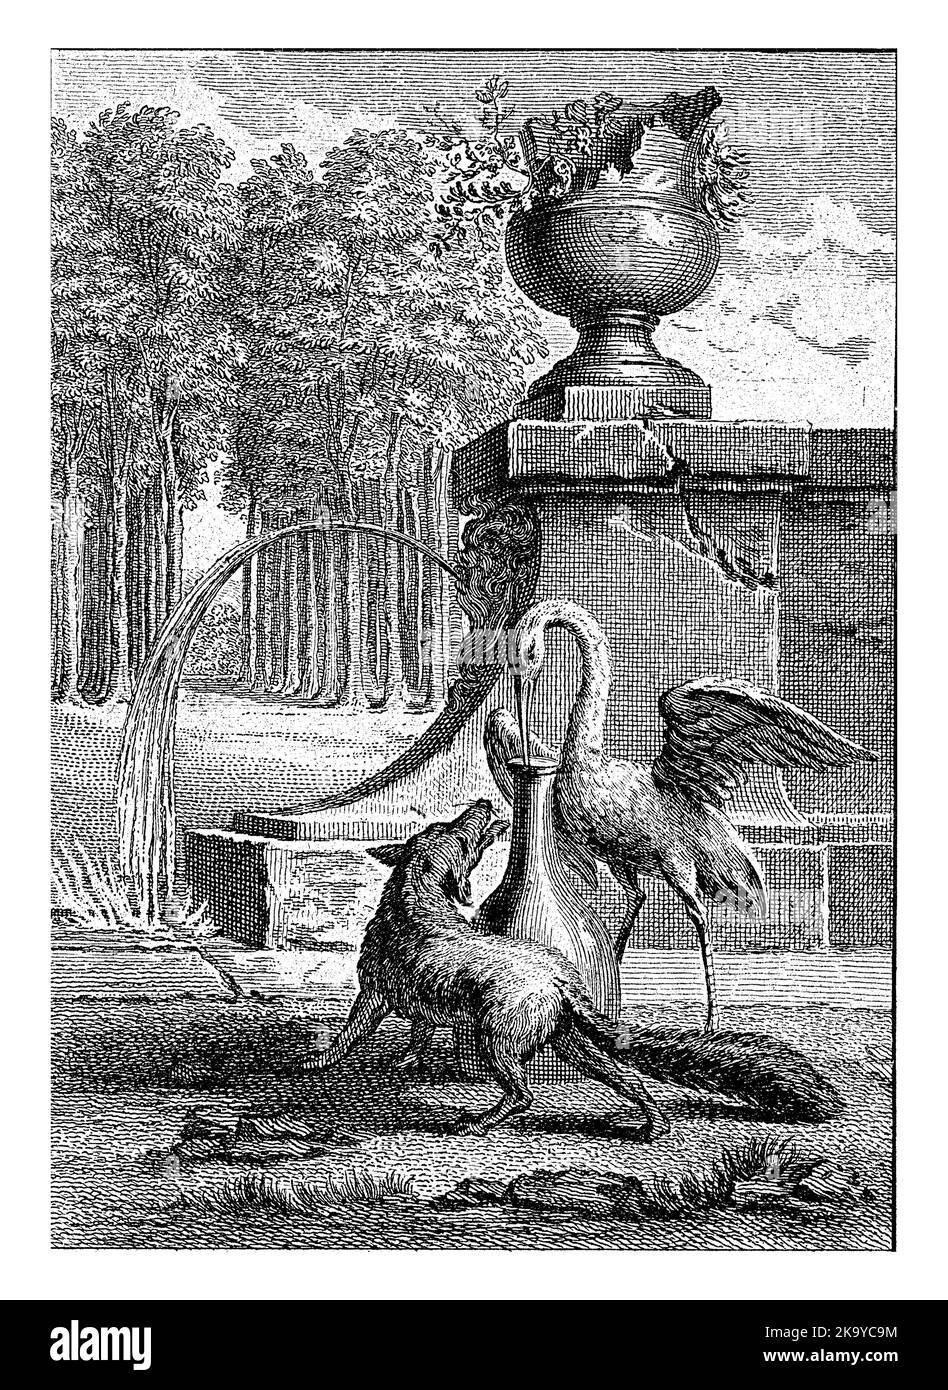 Landscape with a stork and a fox by a fountain. The stork puts its beak in a vase. Illustration of Fable XVIII Le Renard et la Cicogne. Stock Photo